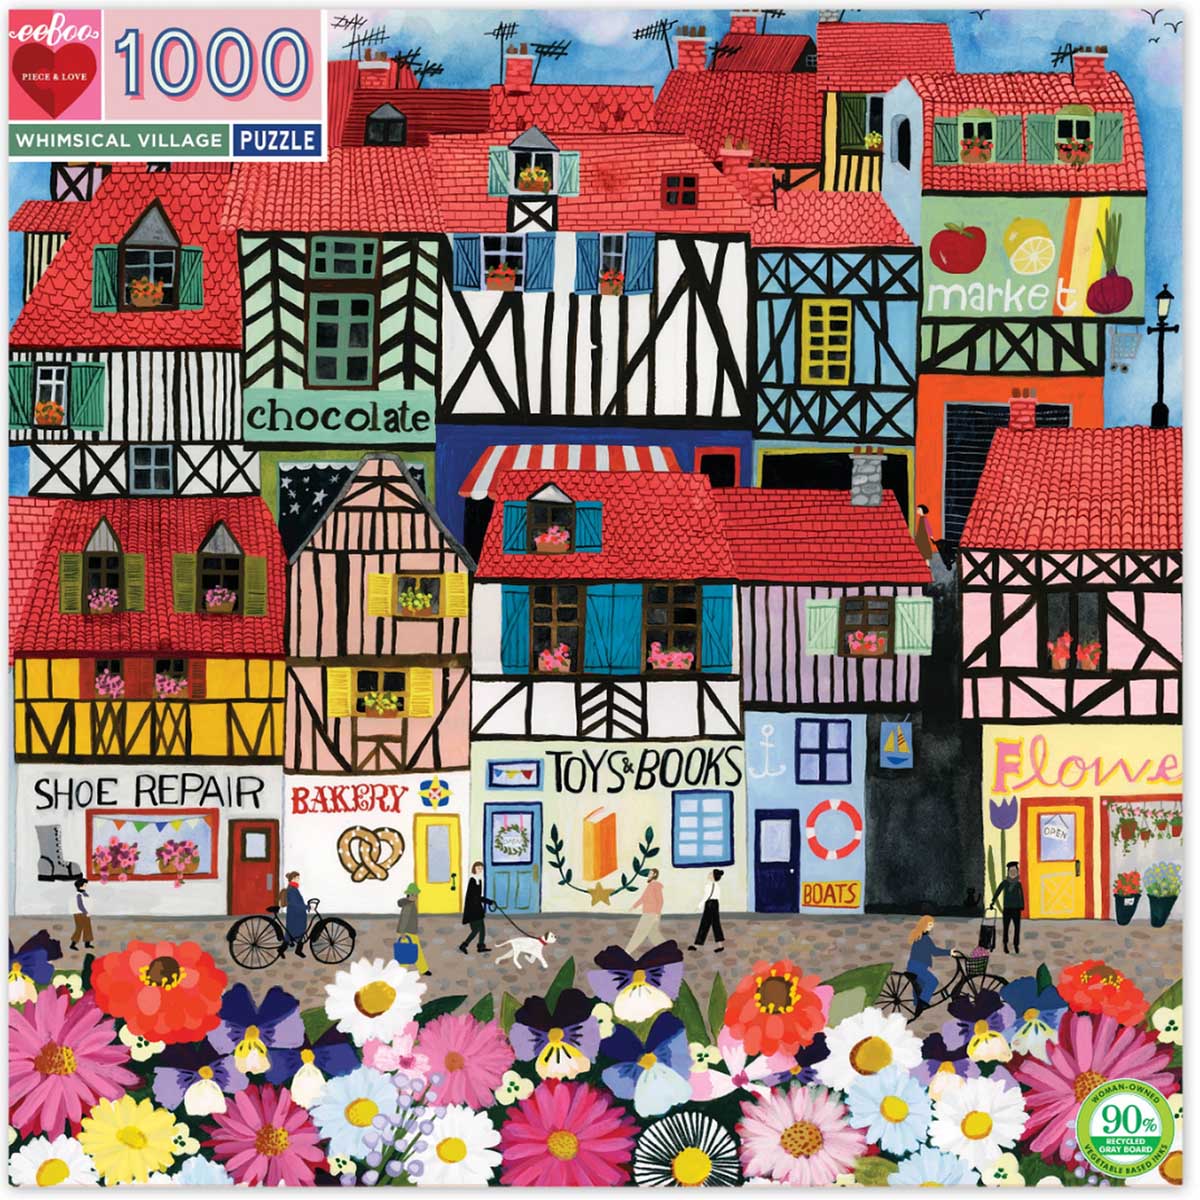 Whimsical Village Summer Jigsaw Puzzle